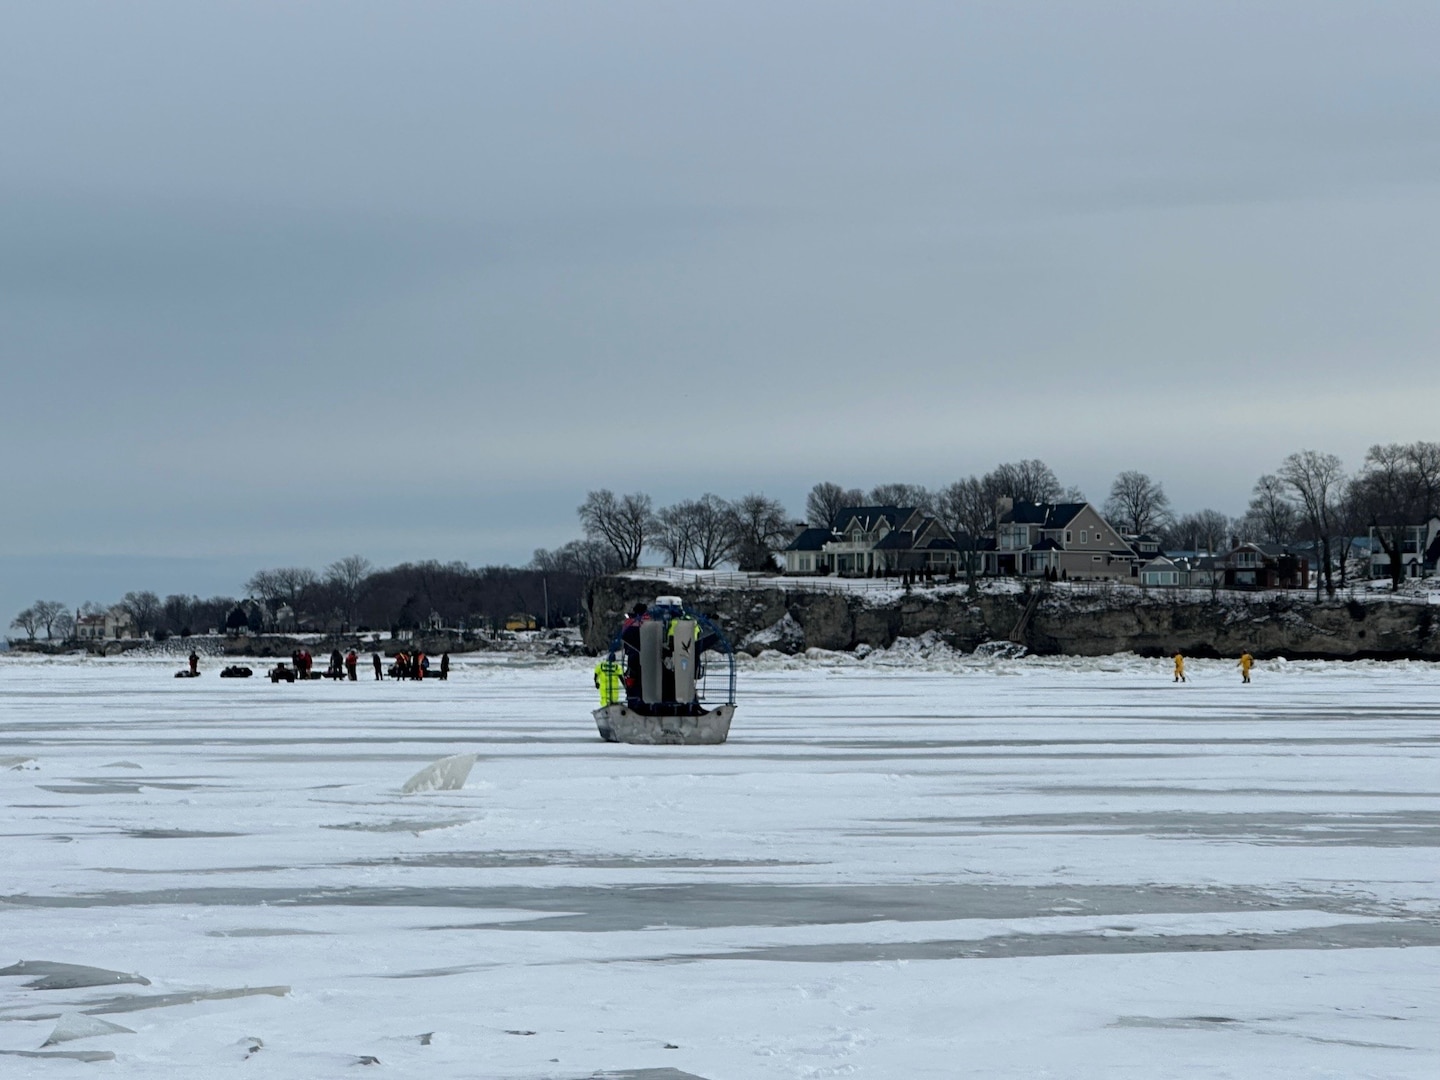 Coast Guard rescues 9 from ice floe on Lake Erie